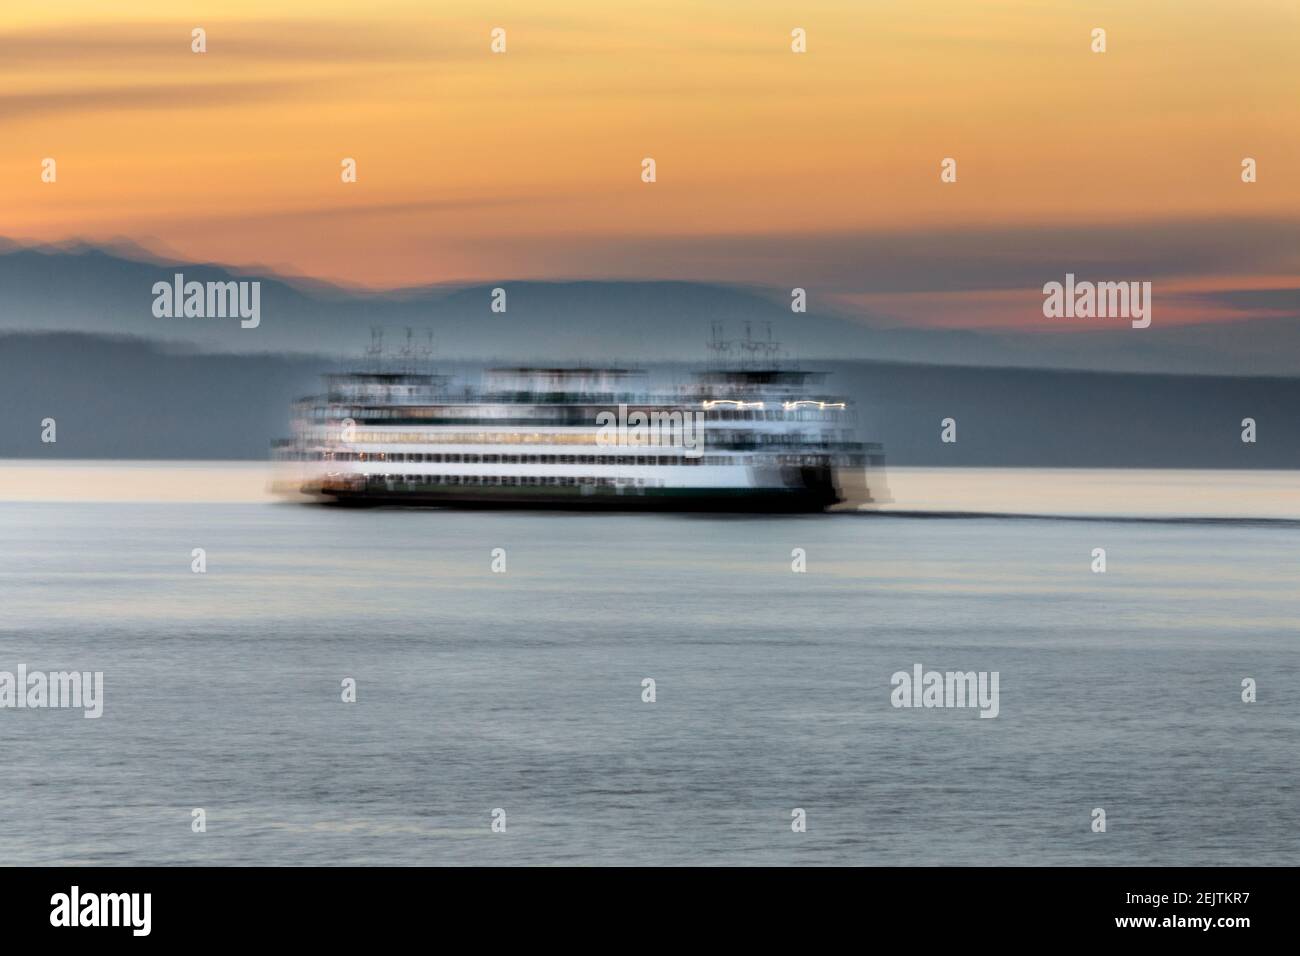 WA20097-00.....WASHINGTON - Abstract of the Edmonds Kingston Ferry crossing the Puget Sound. Viewed from the Edmonds waterfront. Stock Photo